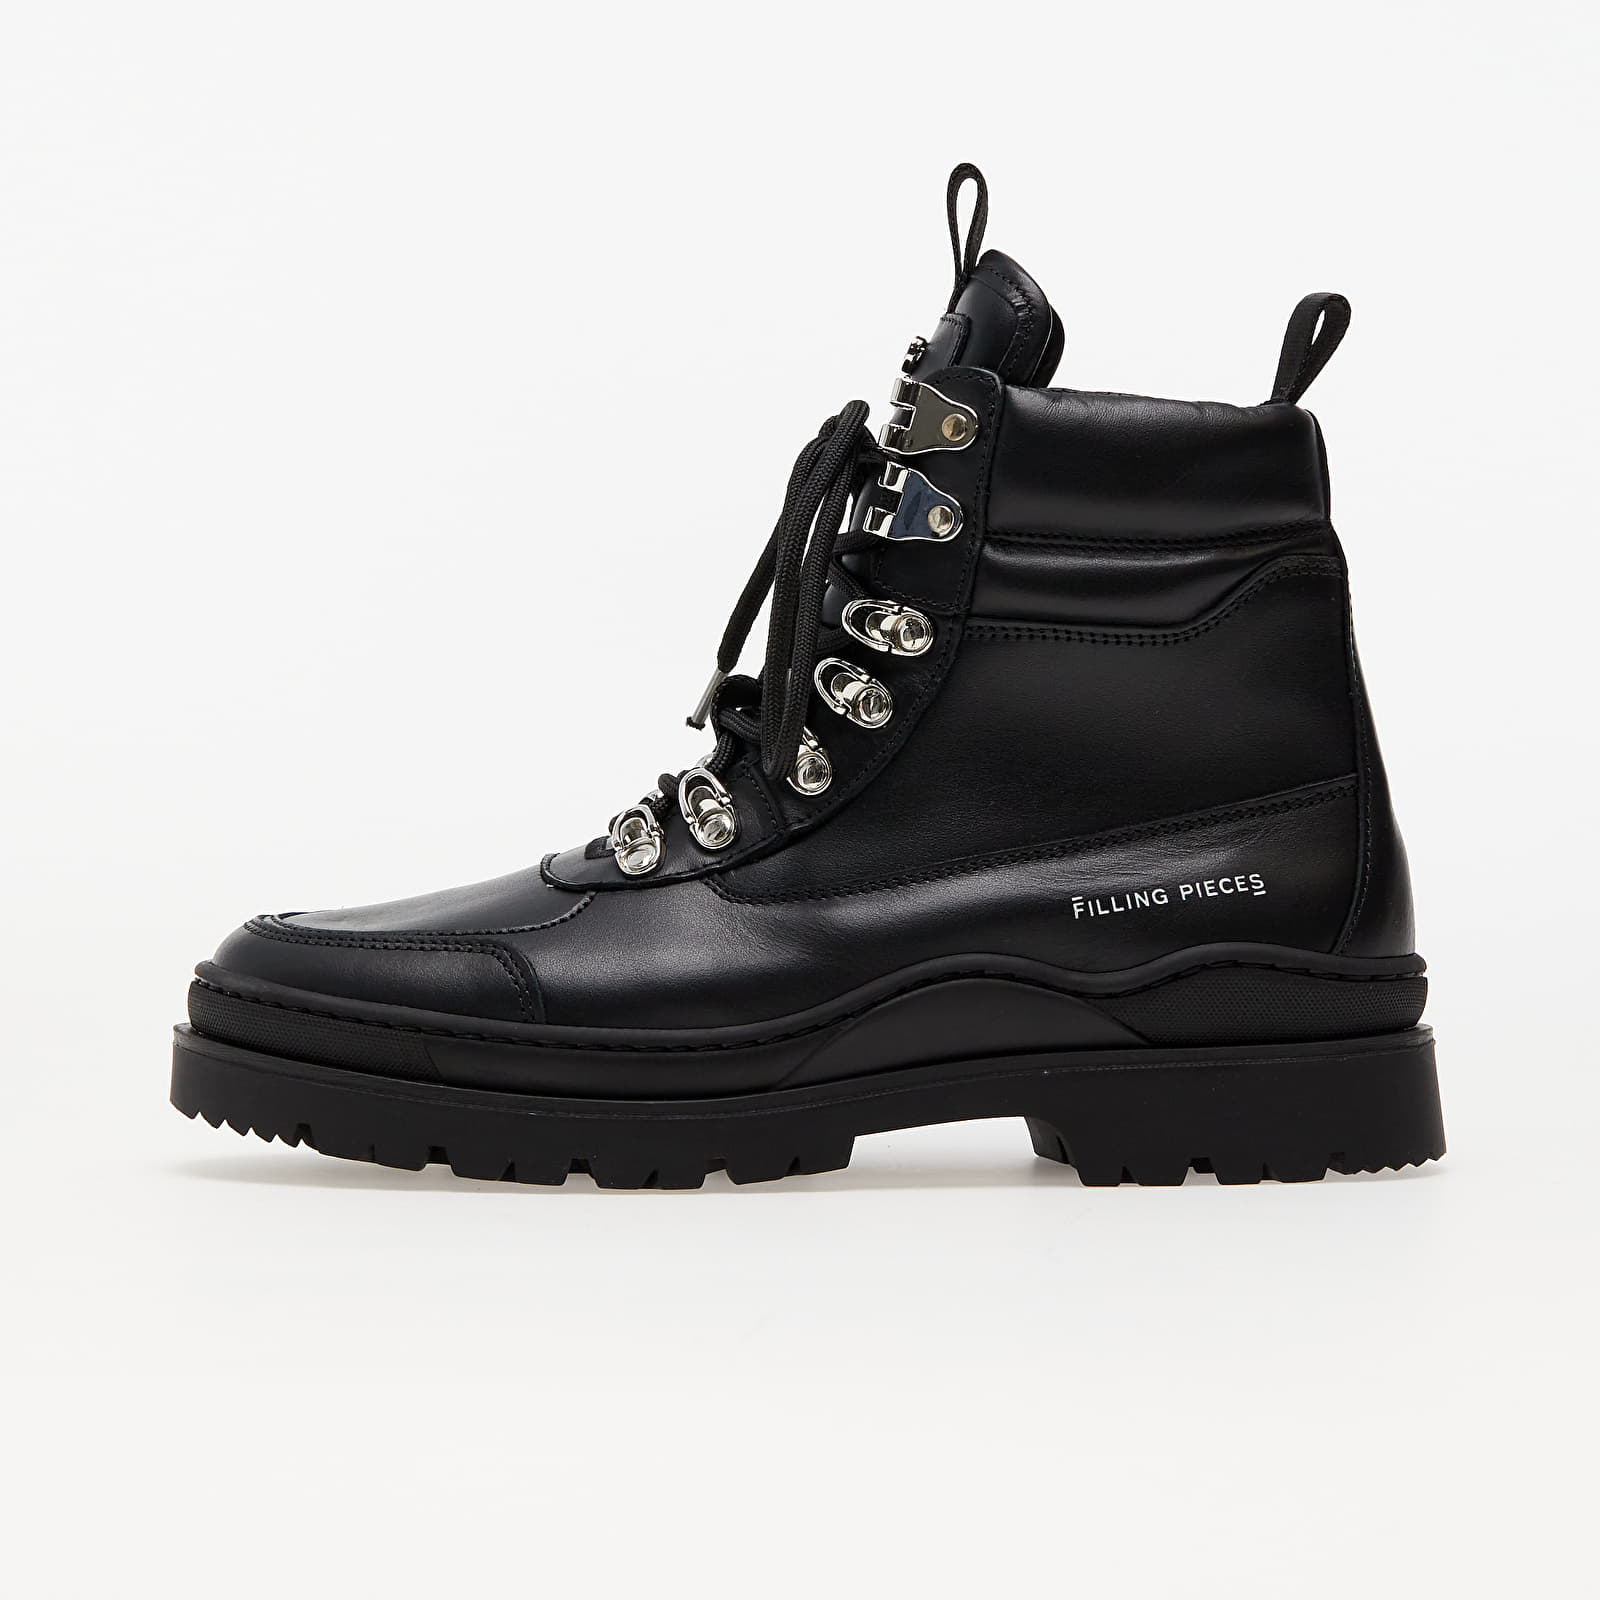 Chaussures et baskets homme Filling Pieces Mountain Boot Nappa Black